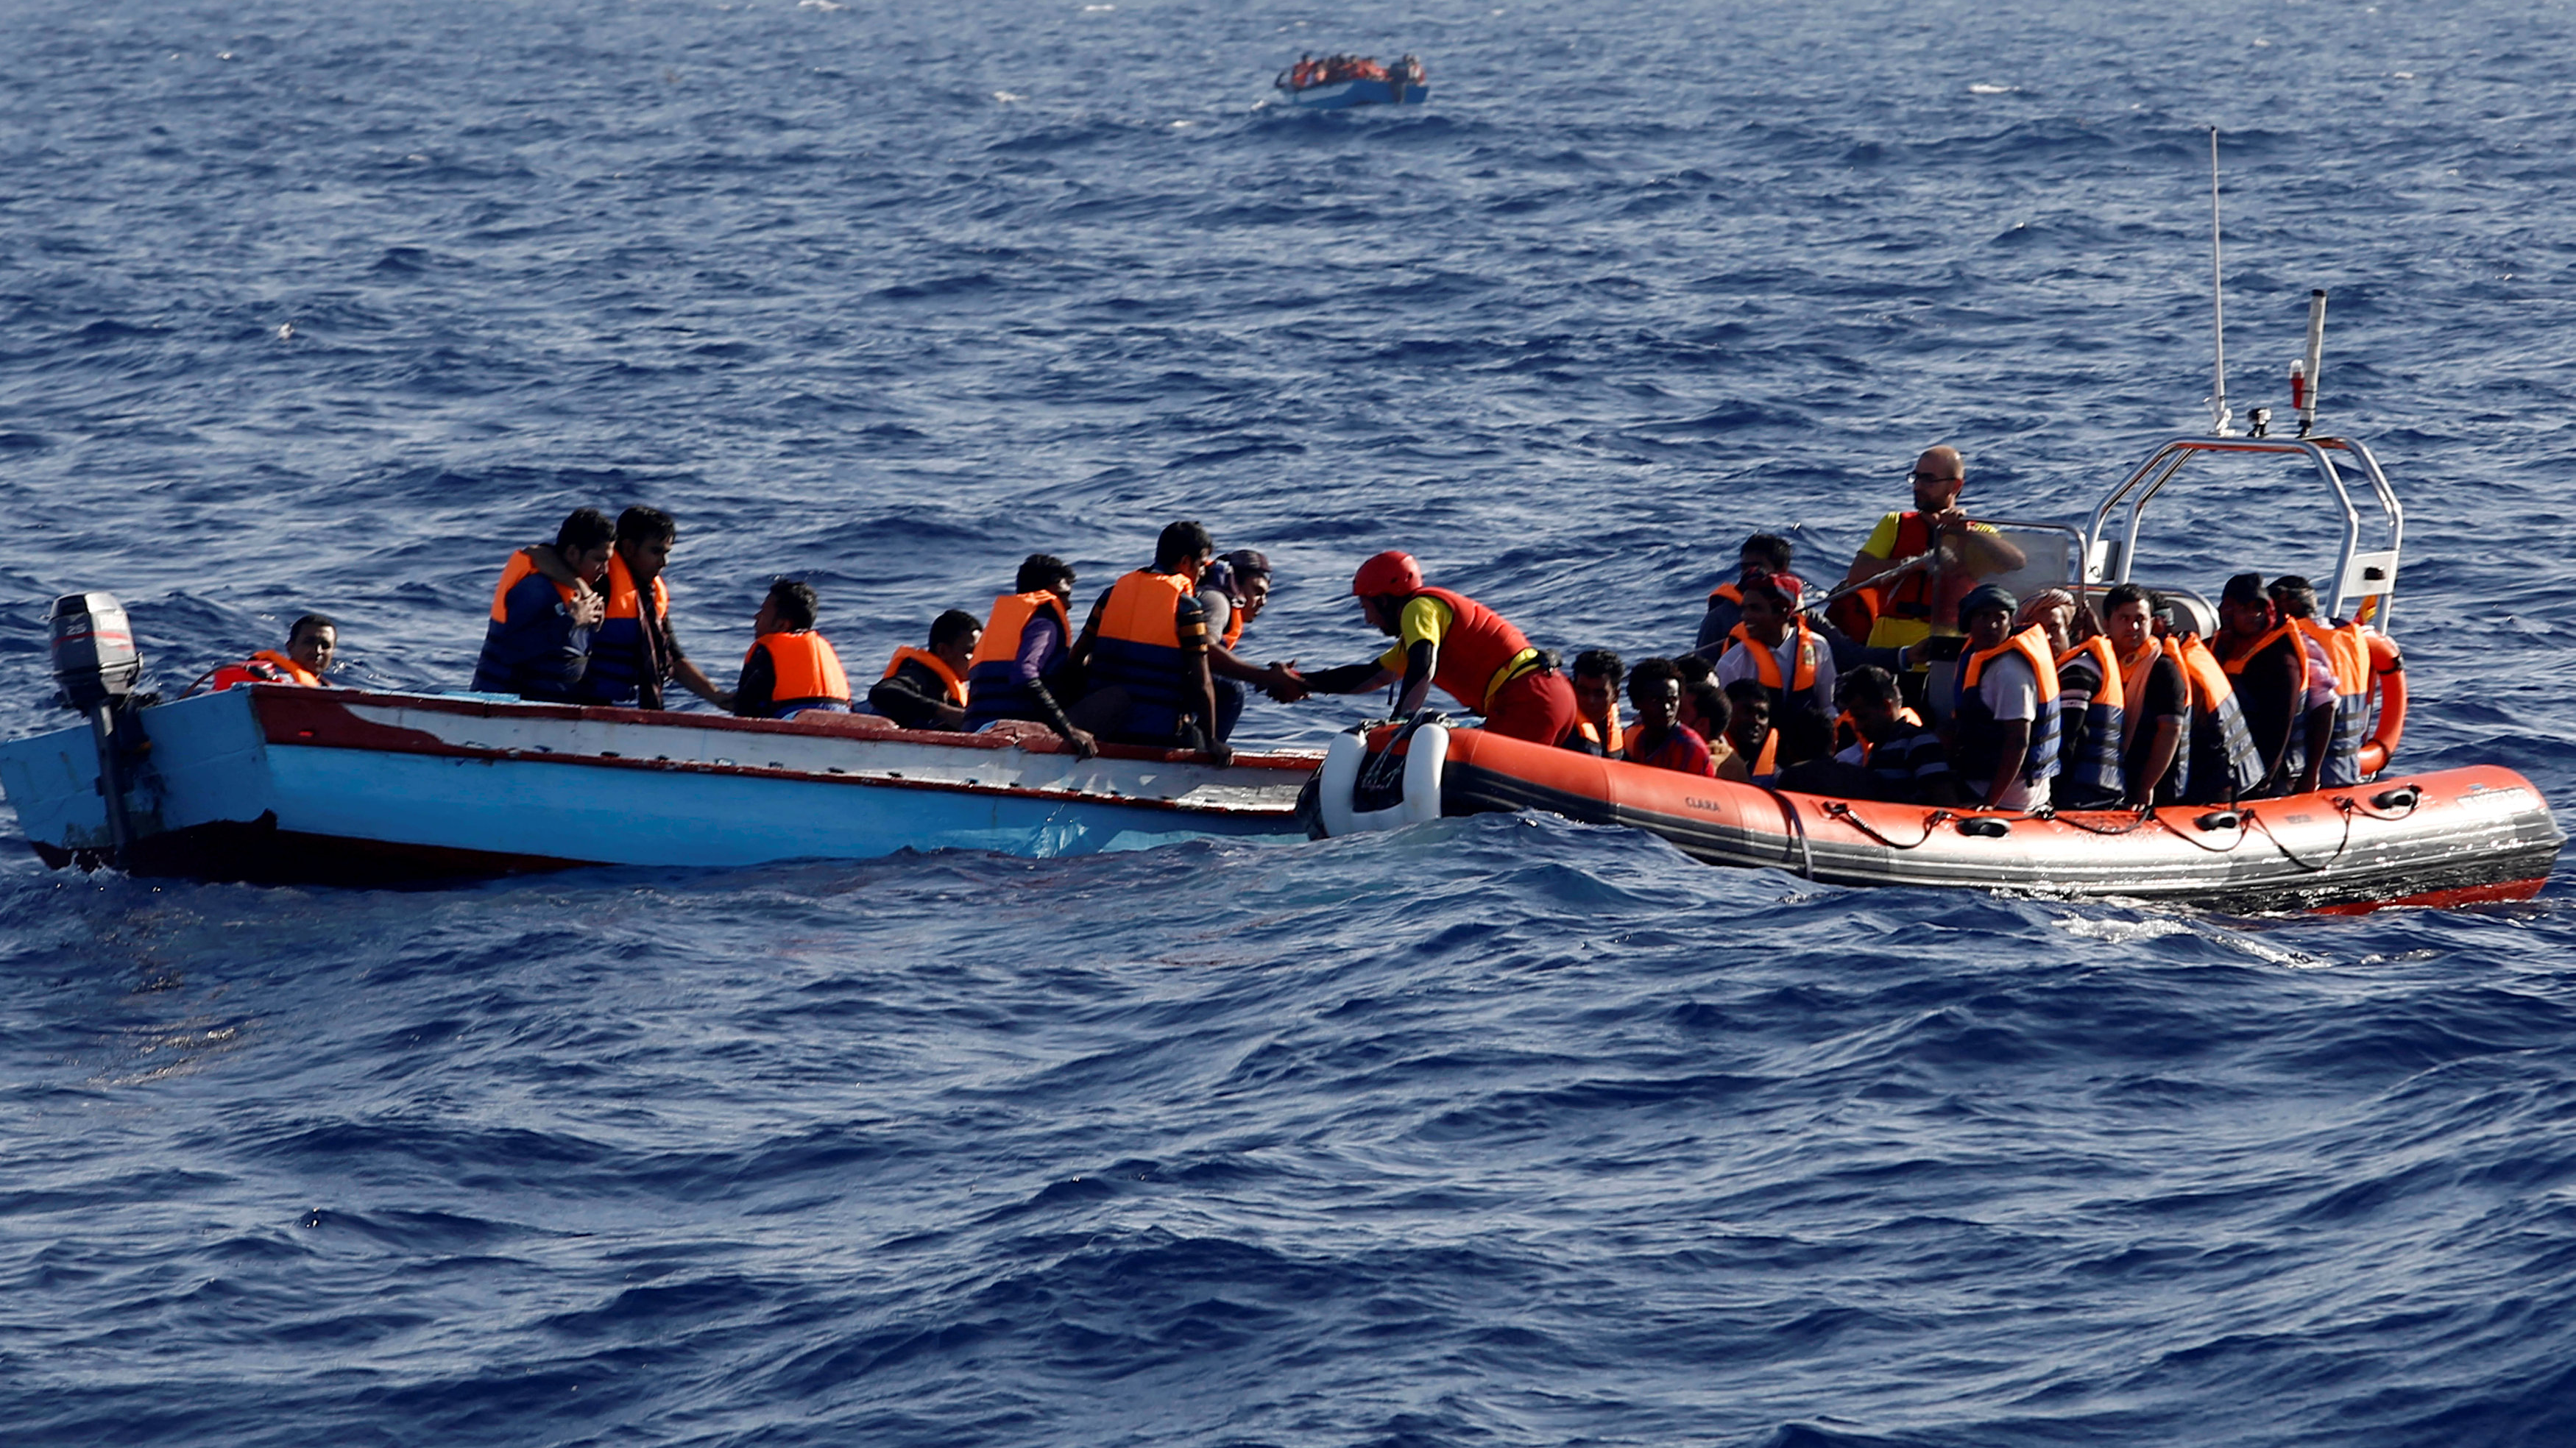 FILE PHOTO: An inflatable boat from the Spanish vessel Astral operated by the NGO Proactiva collects migrants off the Libyan coast in the Mediterranean Sea. /VCG Image